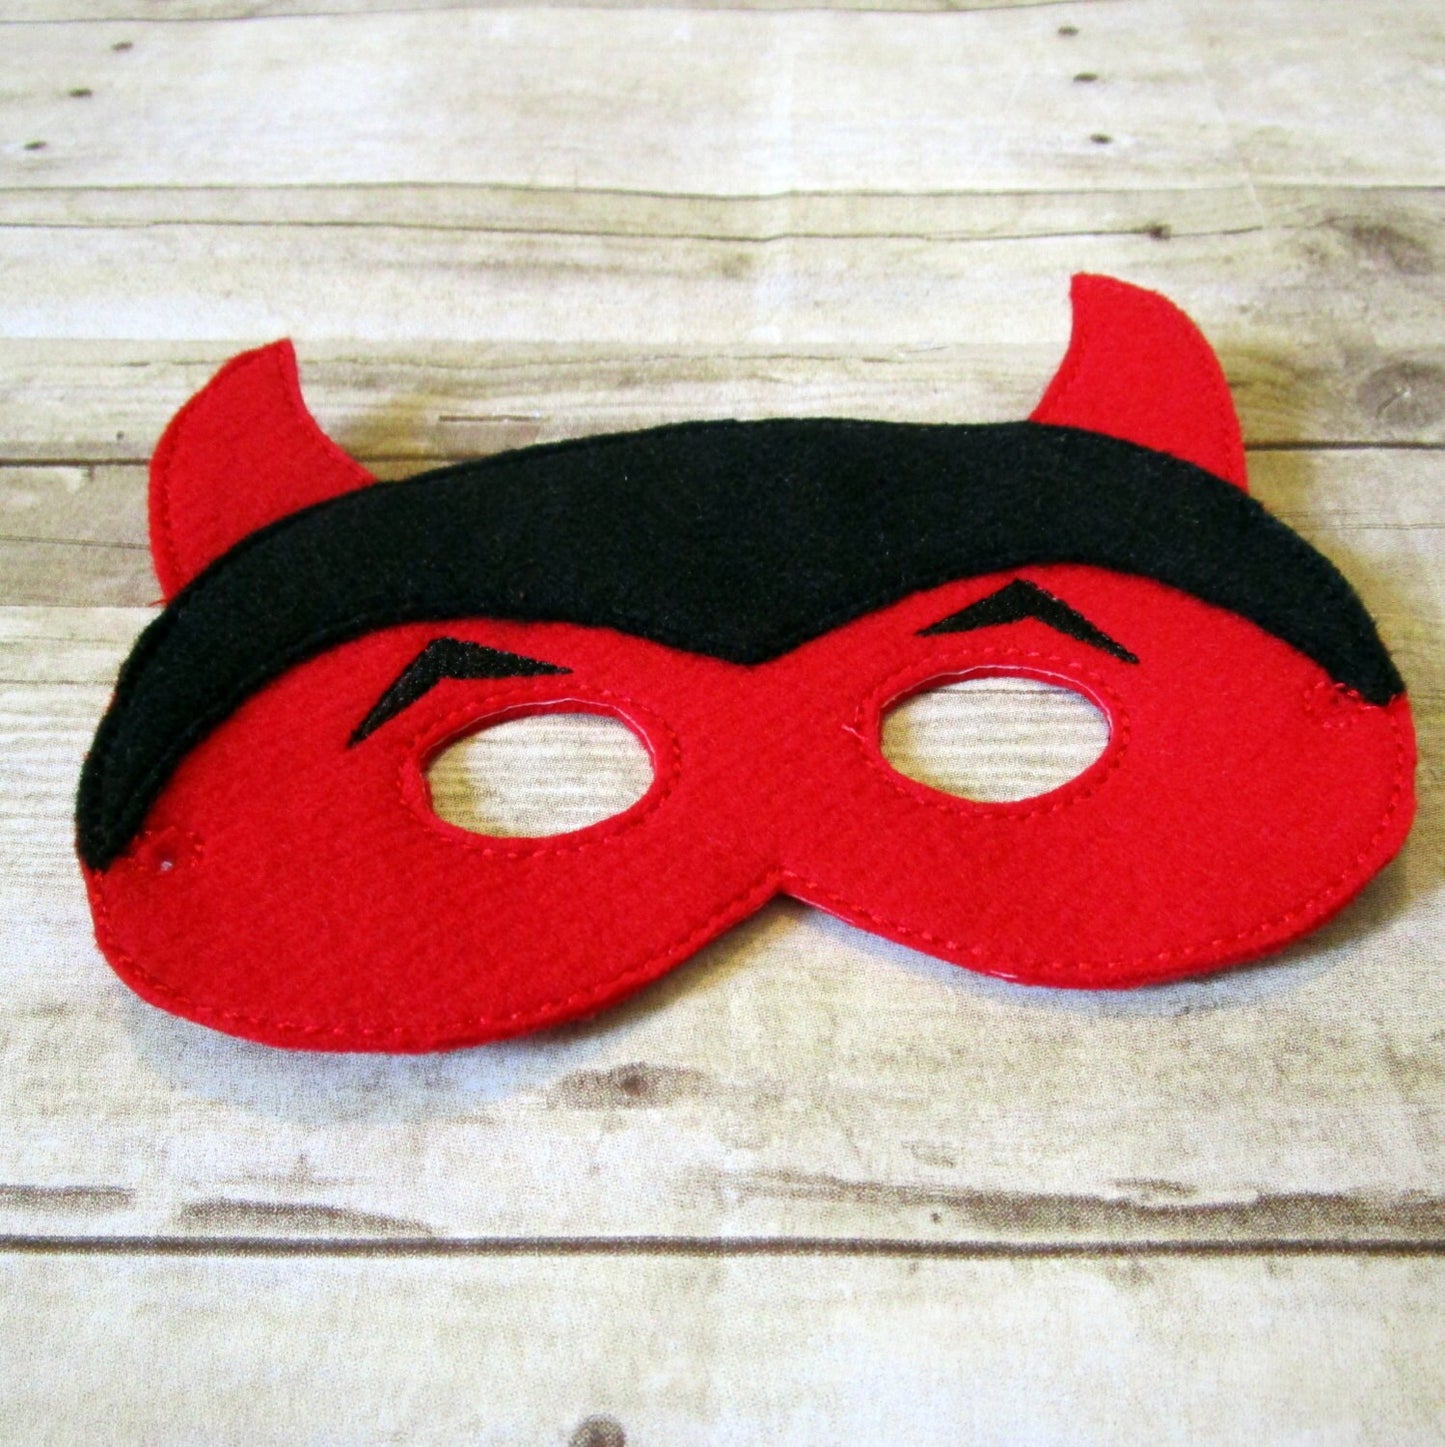 Handcrafted Black and red felt pretend play devil mask for kids